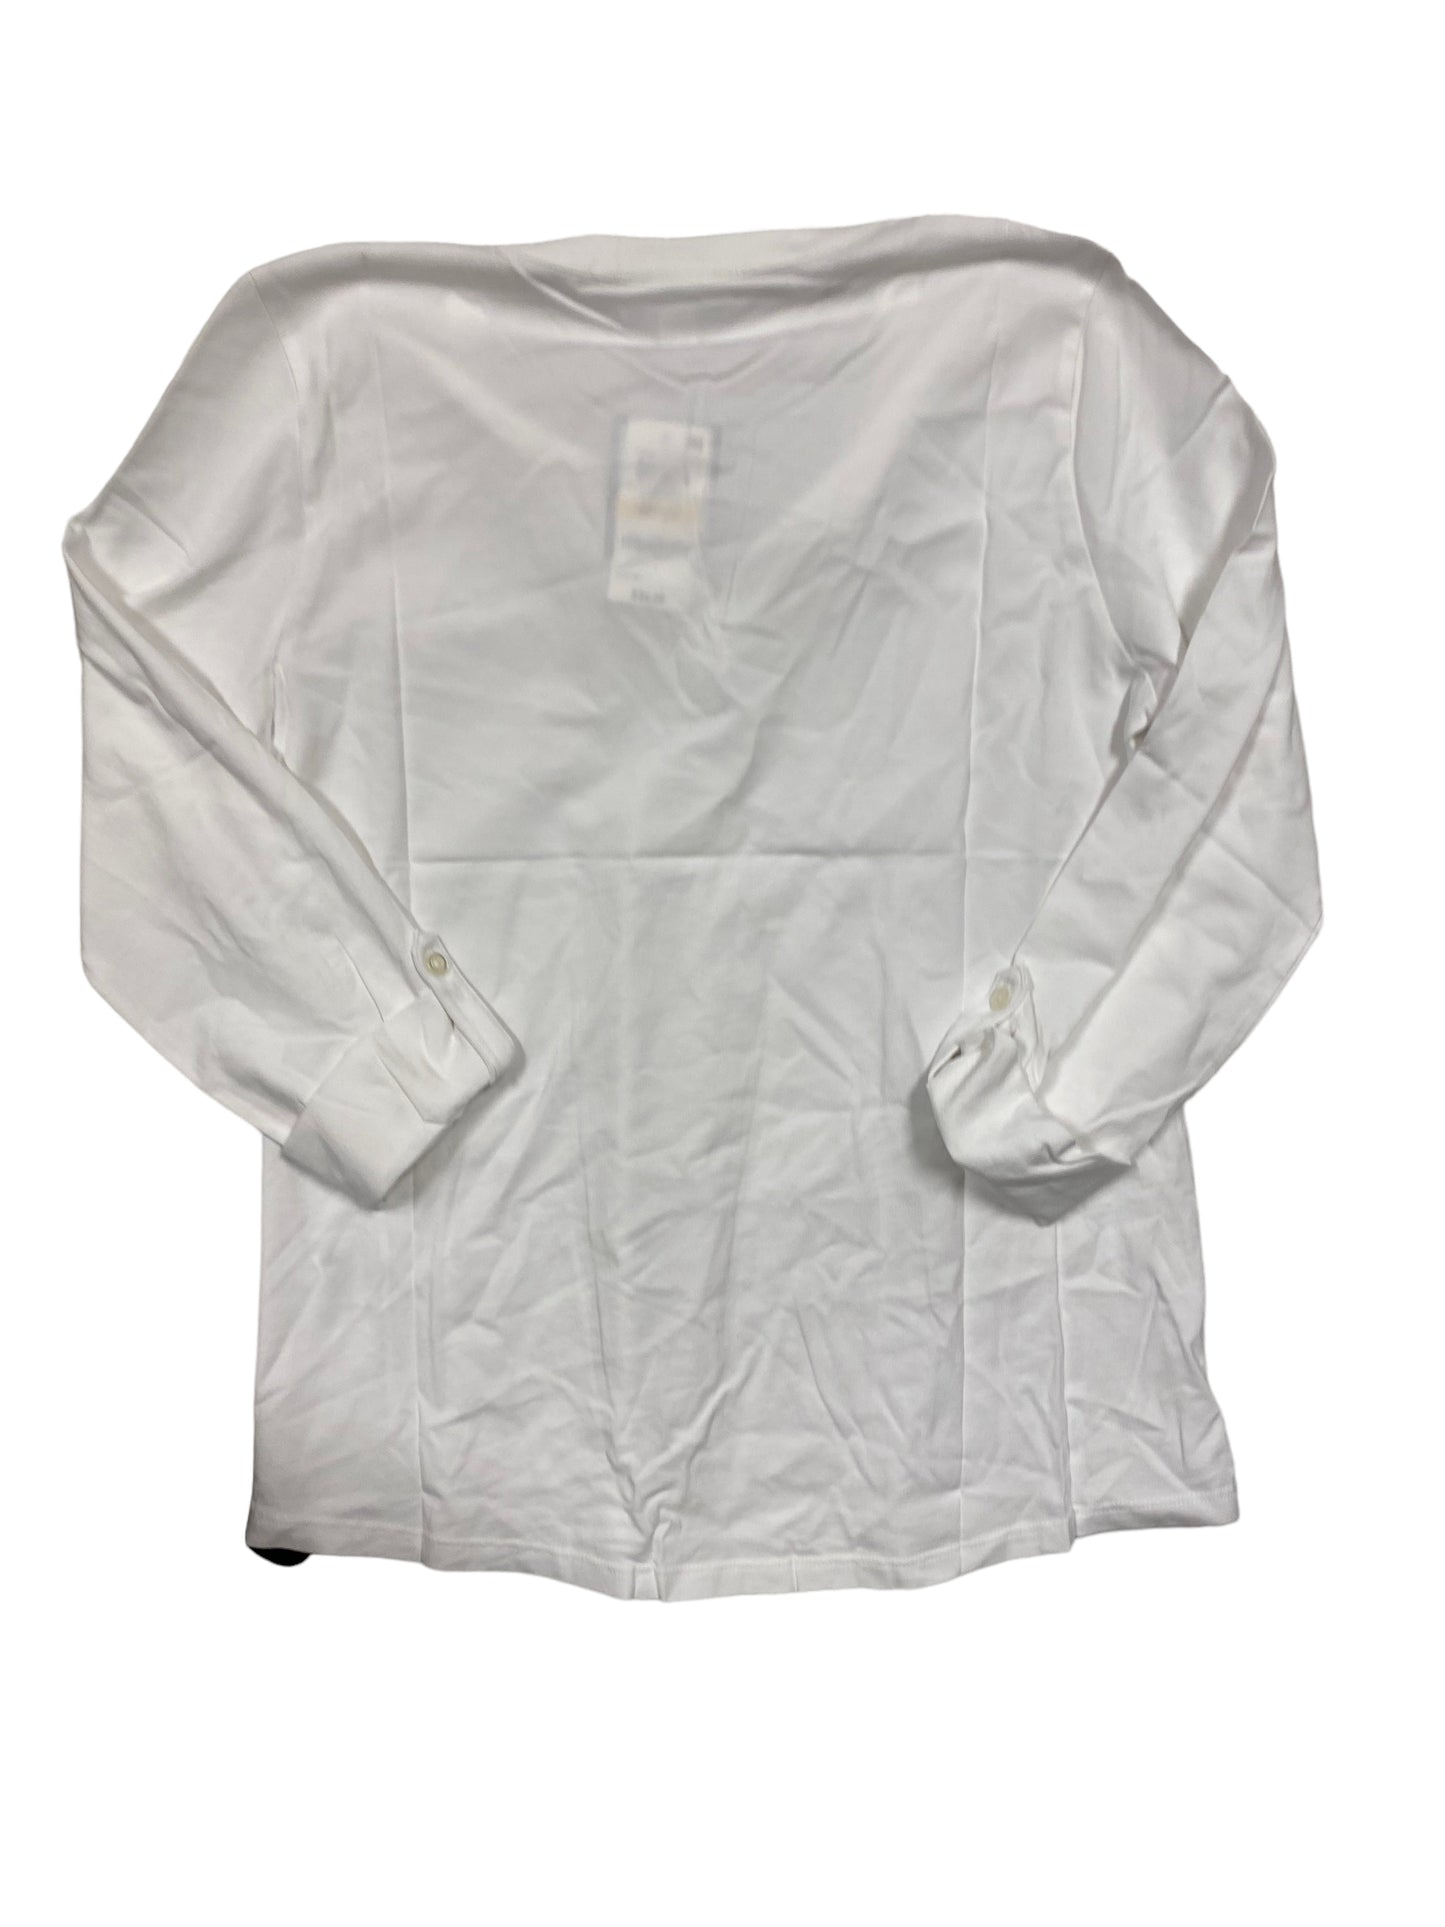 White Top Long Sleeve Charter Club, Size M